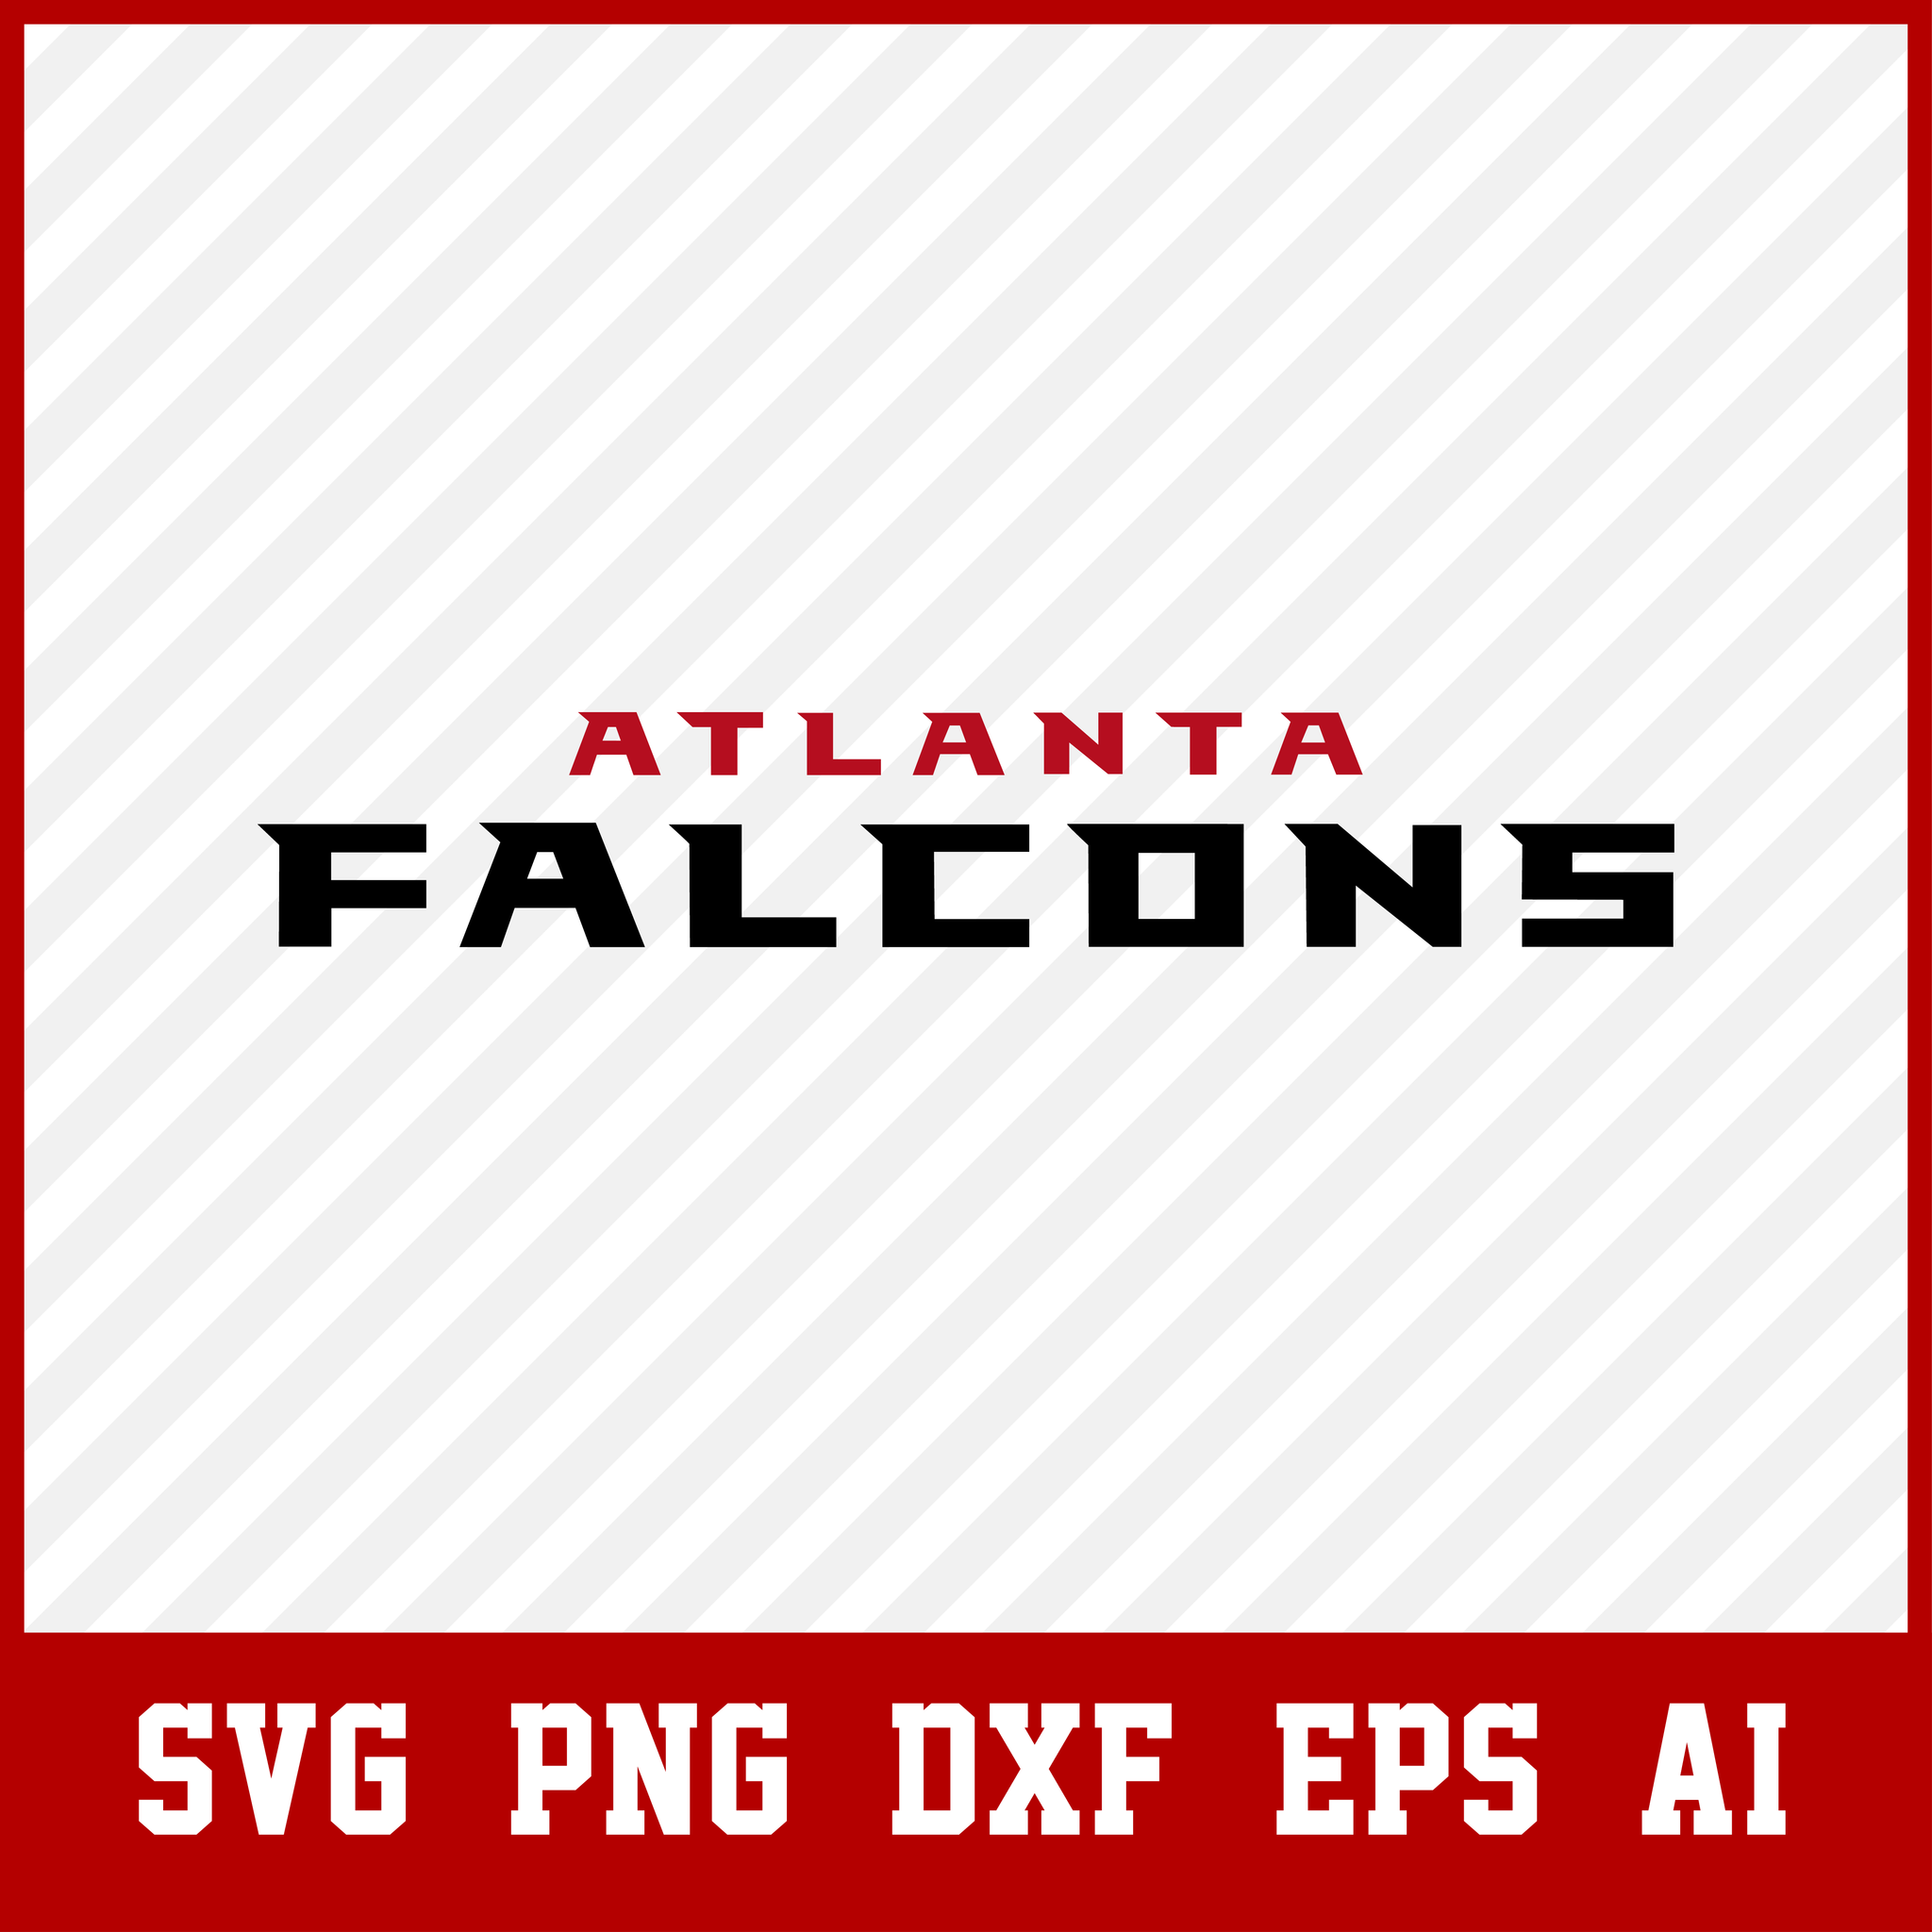 Atlanta Falcons Text logo svg, Football, NFL logo, team svg, dxf, clipart, cut file, vector, eps, pdf, logo, icon  • INSTANT Digital DOWNLOAD includes: 1 Zip and the following file formats: SVG, DXF, PNG, AI, PDF  • Artwork files are perfect for printing, resizing, coloring and modifying with the appropriate software.  • These digital clip art files are perfect for any projects such as: Scrap booking, paper goods, DIY invitations & announcements, clothing and accessories, party favors, cupcake toppers, labe